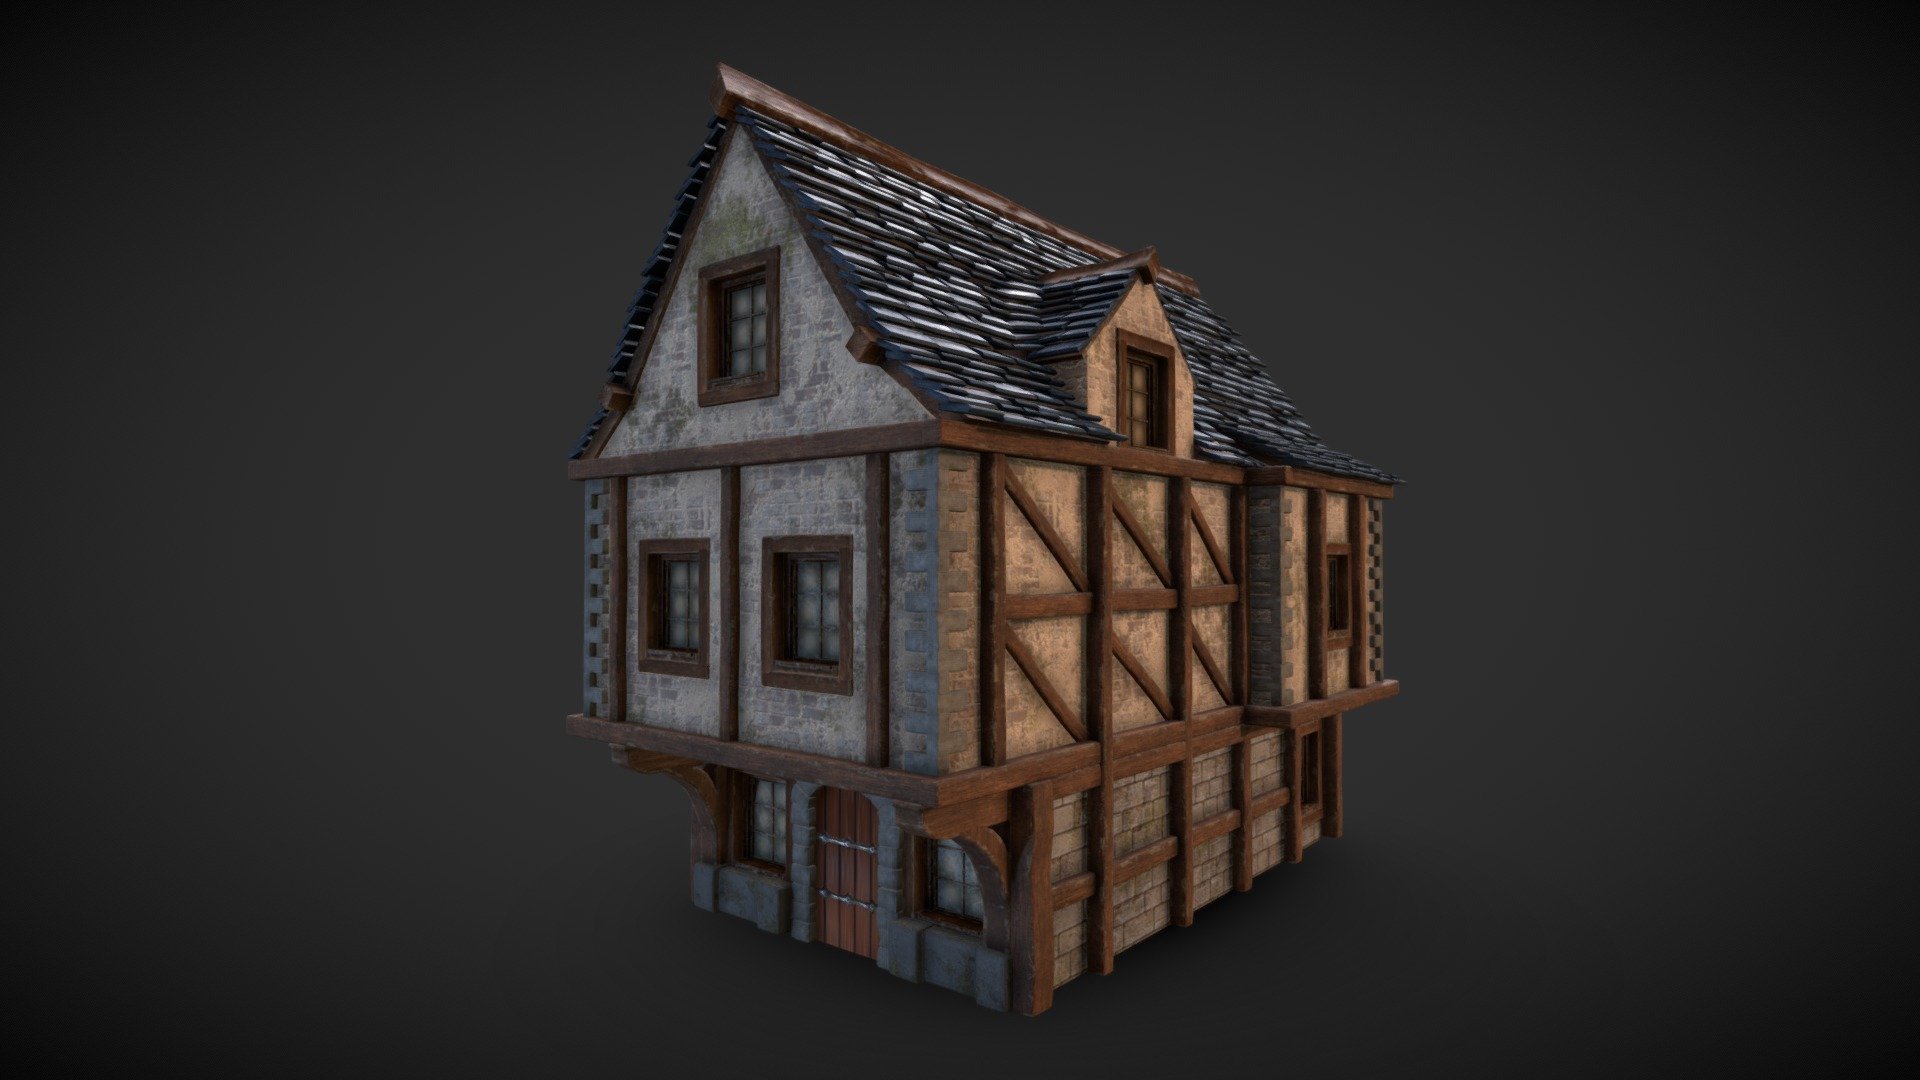 One model from my medieval city project available on my Artstation:
https://www.artstation.com/artwork/dOYoow - Medieval House - 3D model by Naxyo 3d model